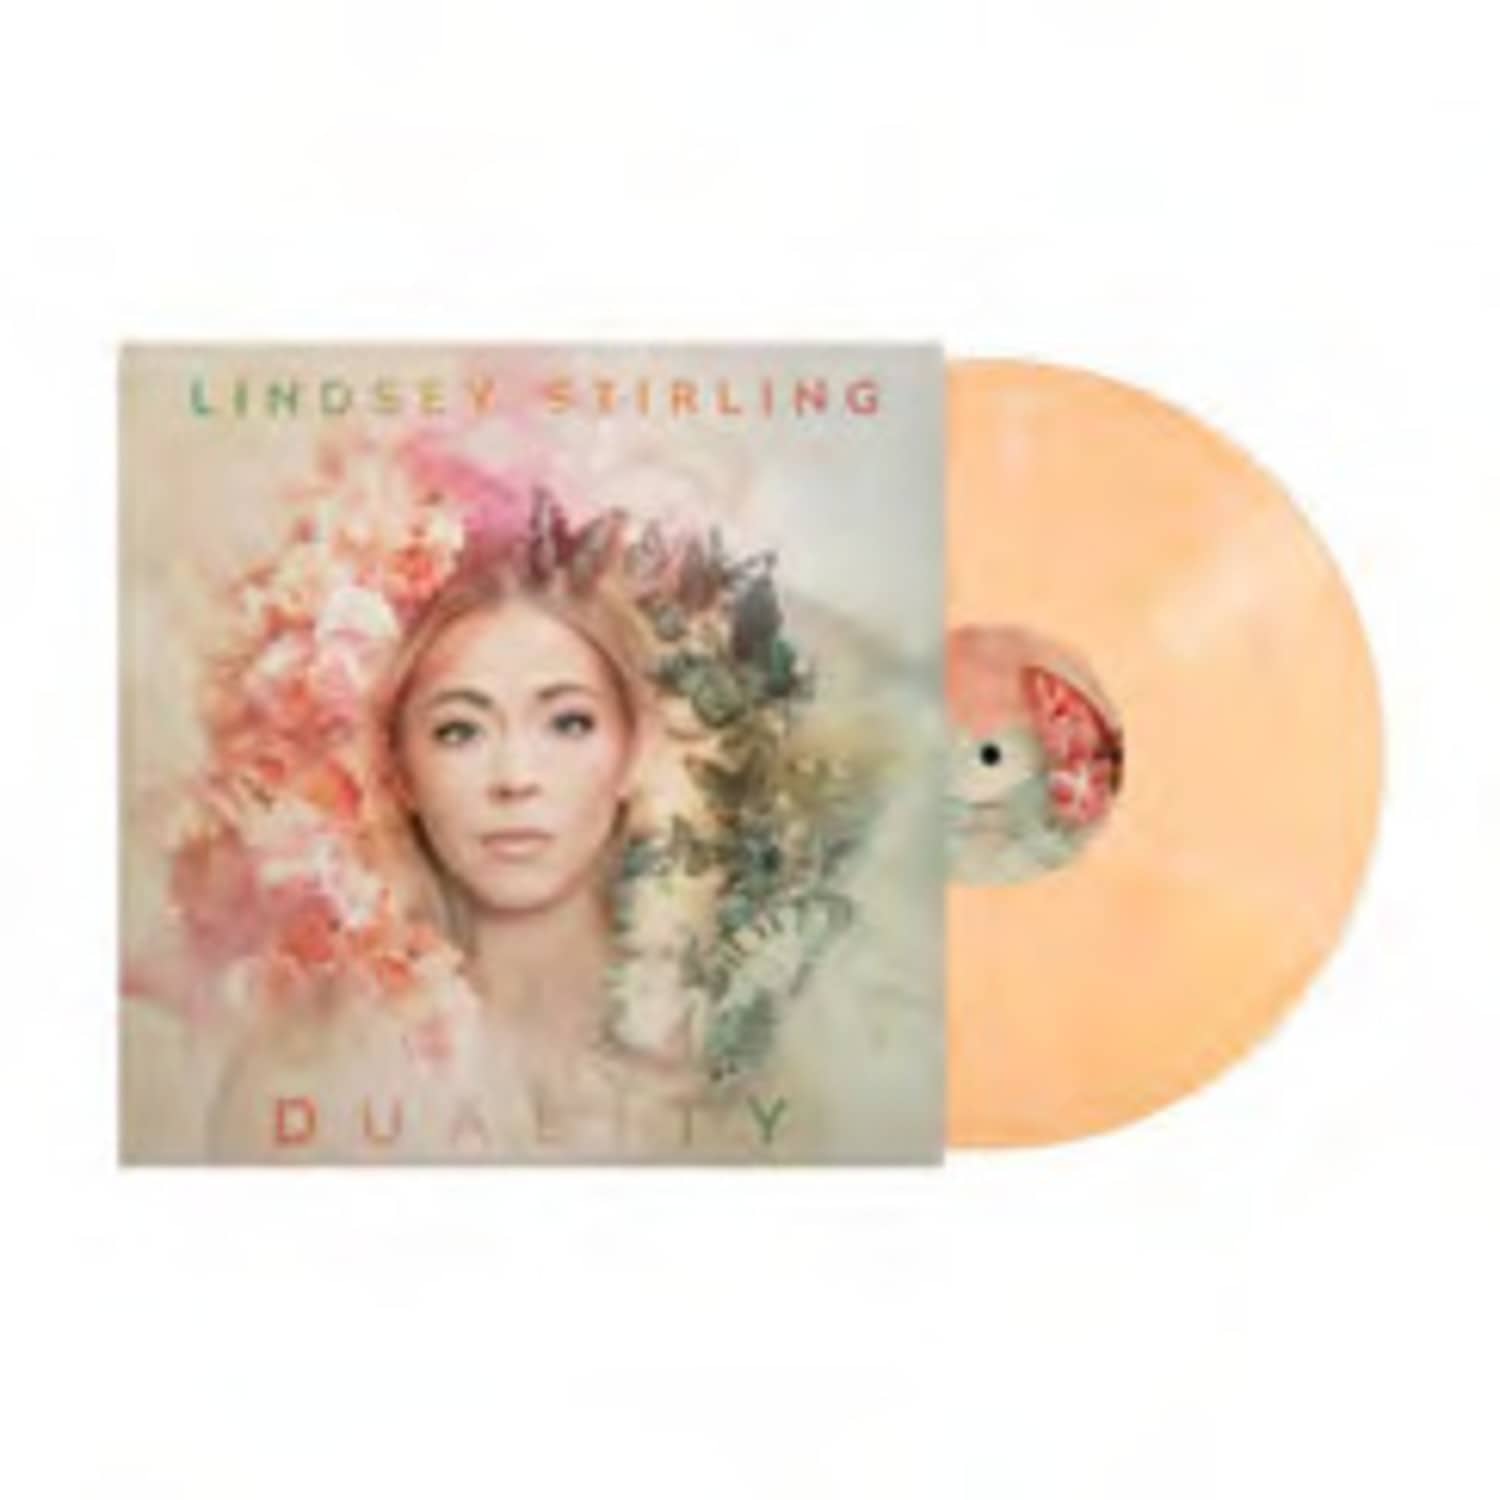 Lindsey Stirling - DUALITY 